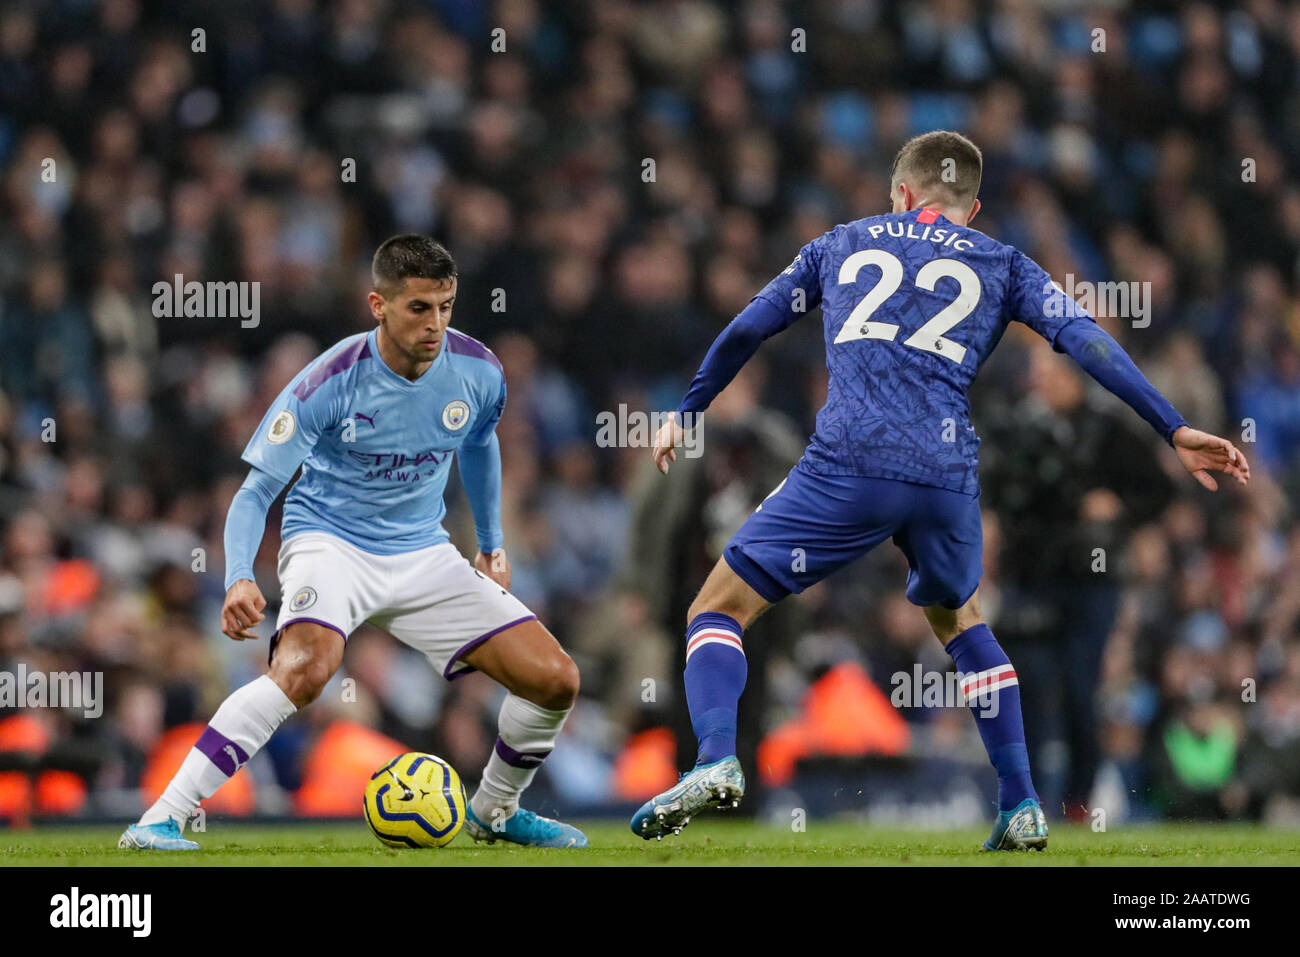 23rd November 2019, Etihad Stadium, Manchester, England; Premier League, Manchester City v Chelsea : Joao Cancelo (27) of Manchester City loos for a way past Christian Pulisic (22) of Chelsea  Credit: Mark Cosgrove/News Images Stock Photo